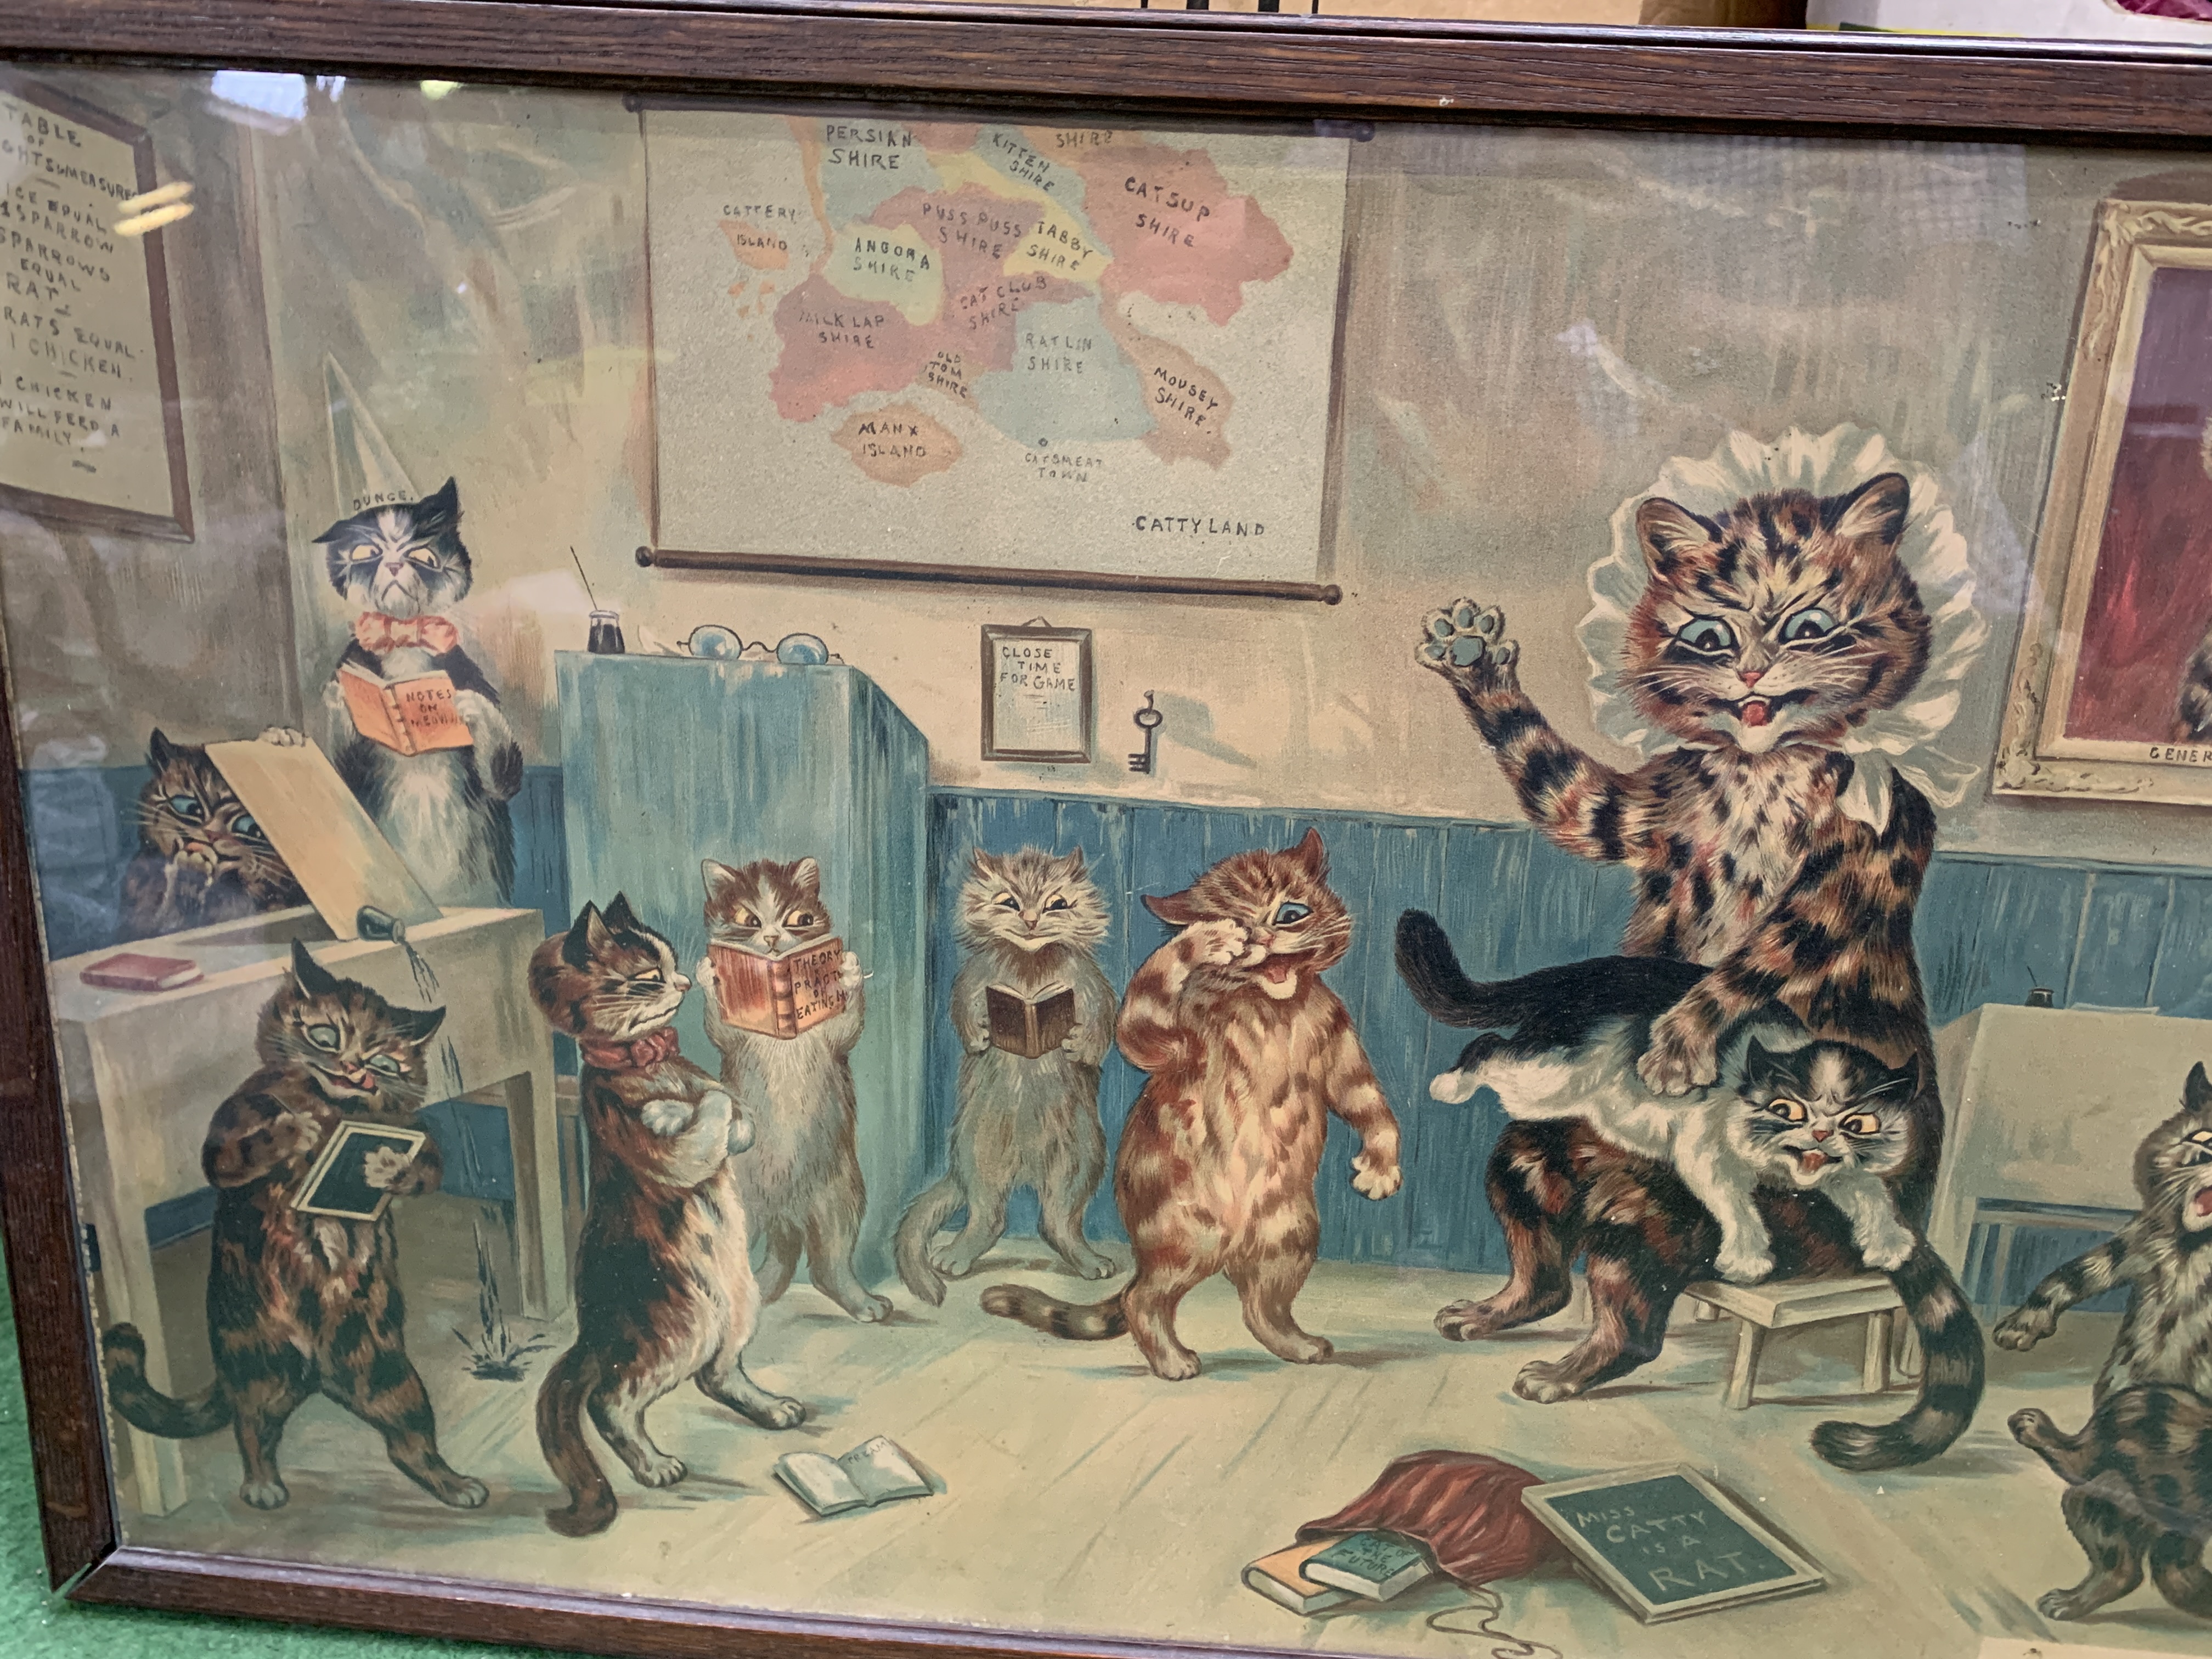 Framed and glazed Louis Wain print "The Naughty Puss" - Image 2 of 4